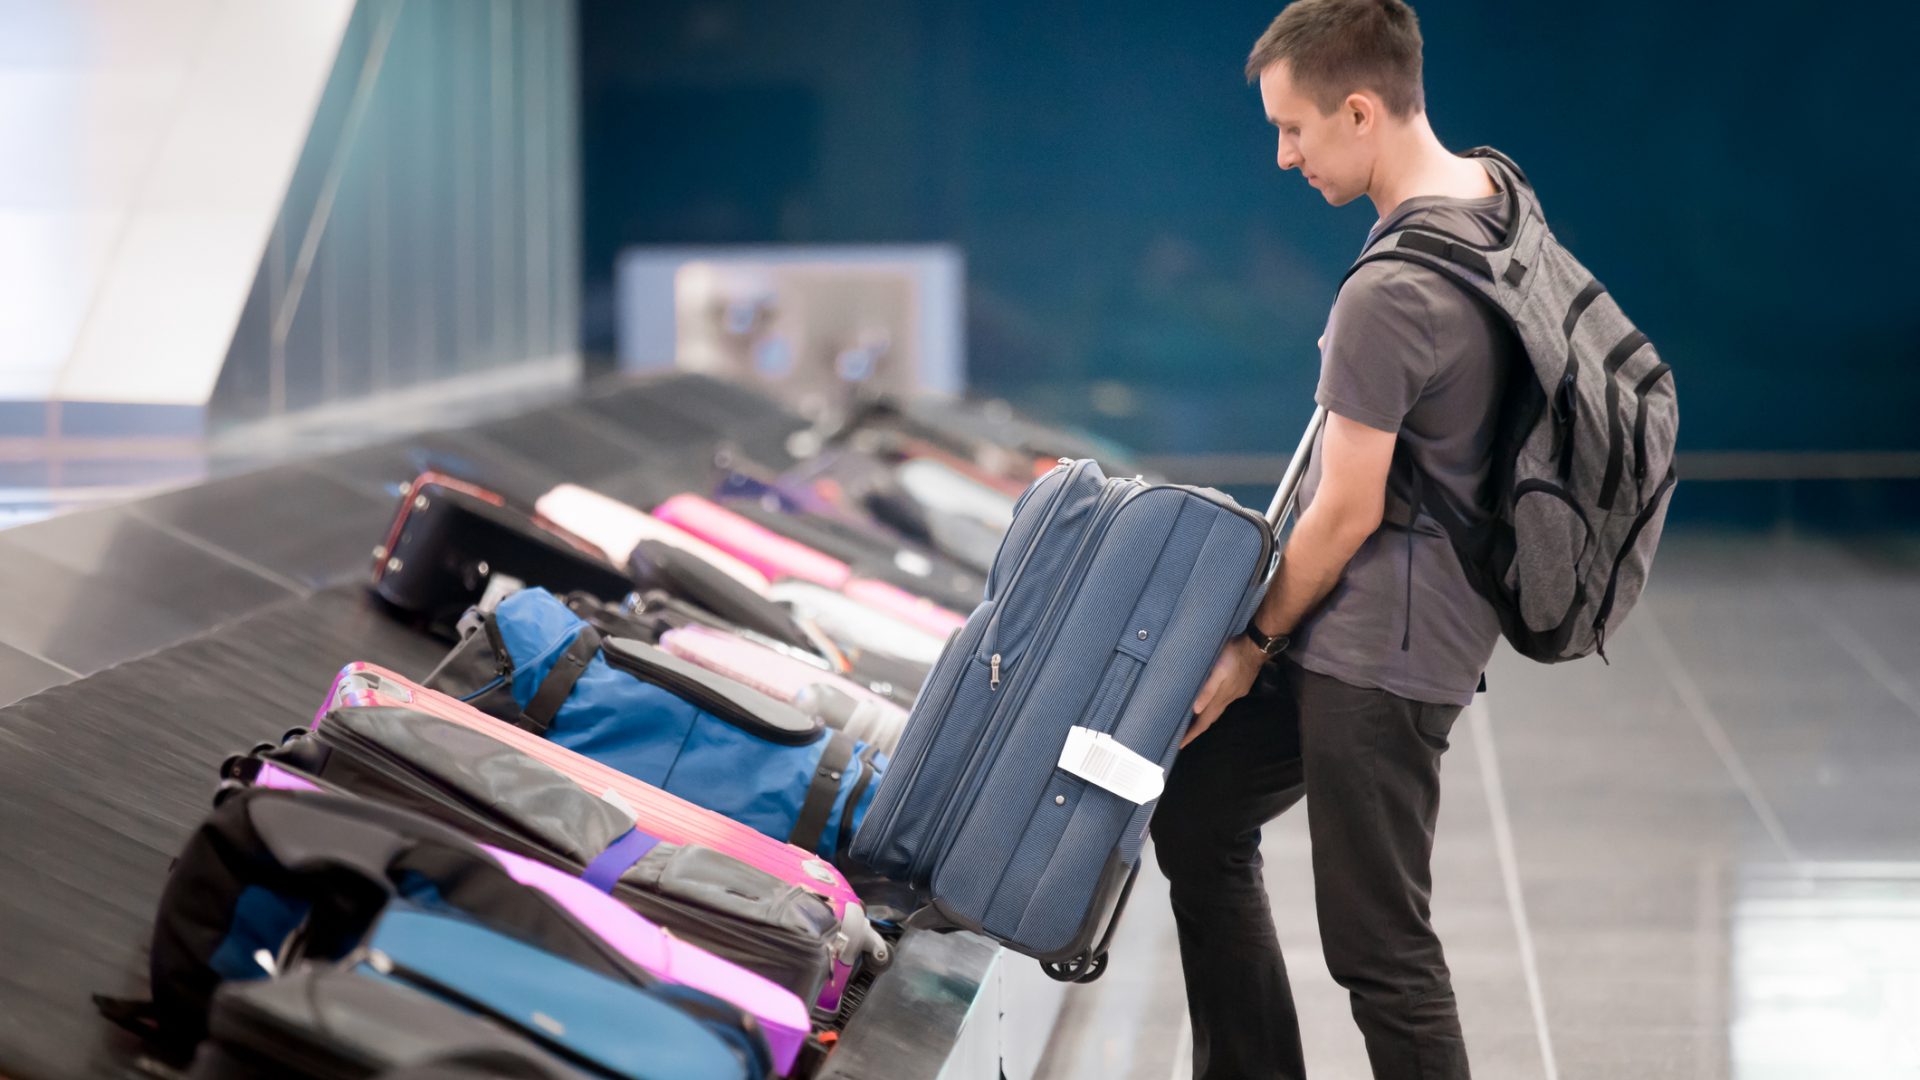 10 tips for traveling with valuable luggage and handbags - The Points Guy